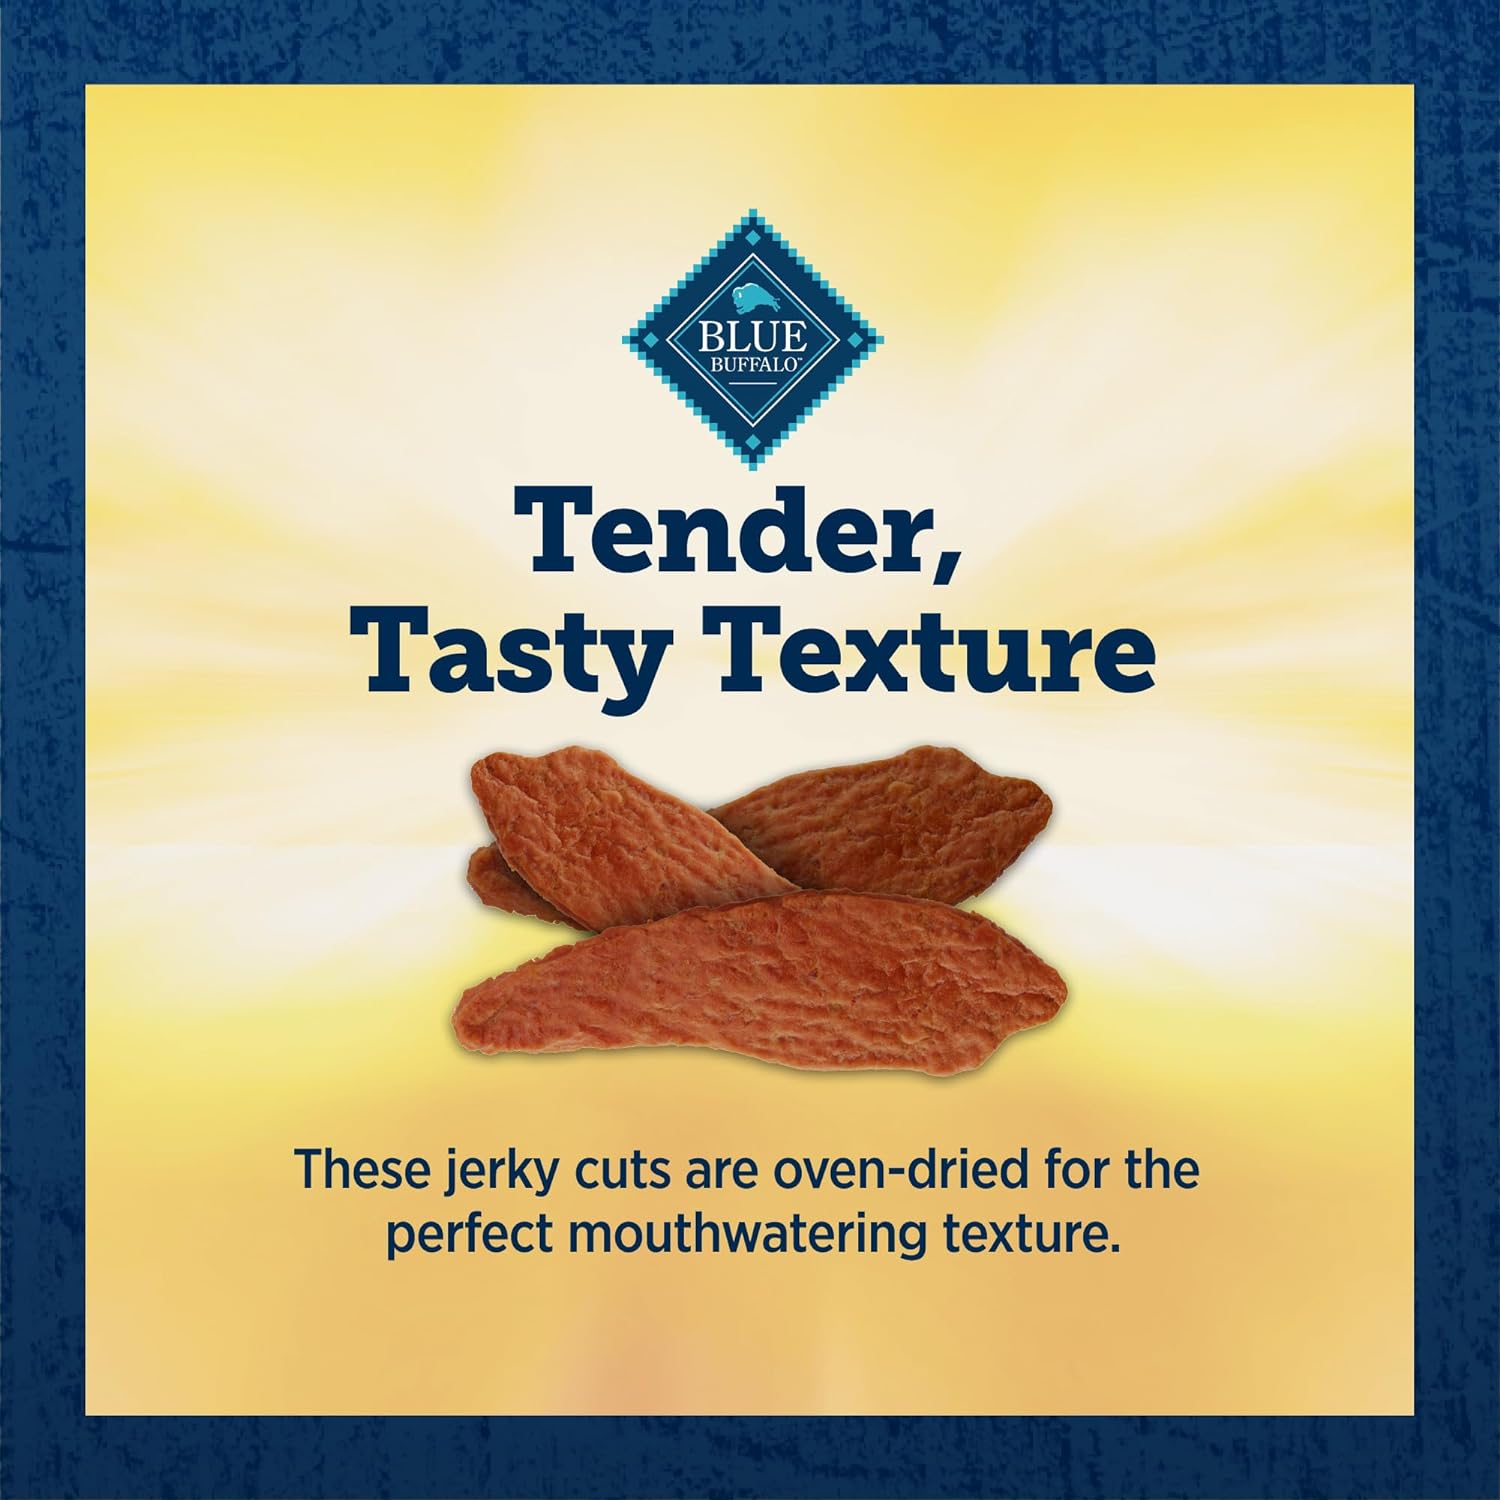 Blue Buffalo True Chews Premium Jerky Cuts Dog Treats, Made in the USA with Natural Ingredients and No Antibiotics Ever, Chicken, 4-oz. Bag